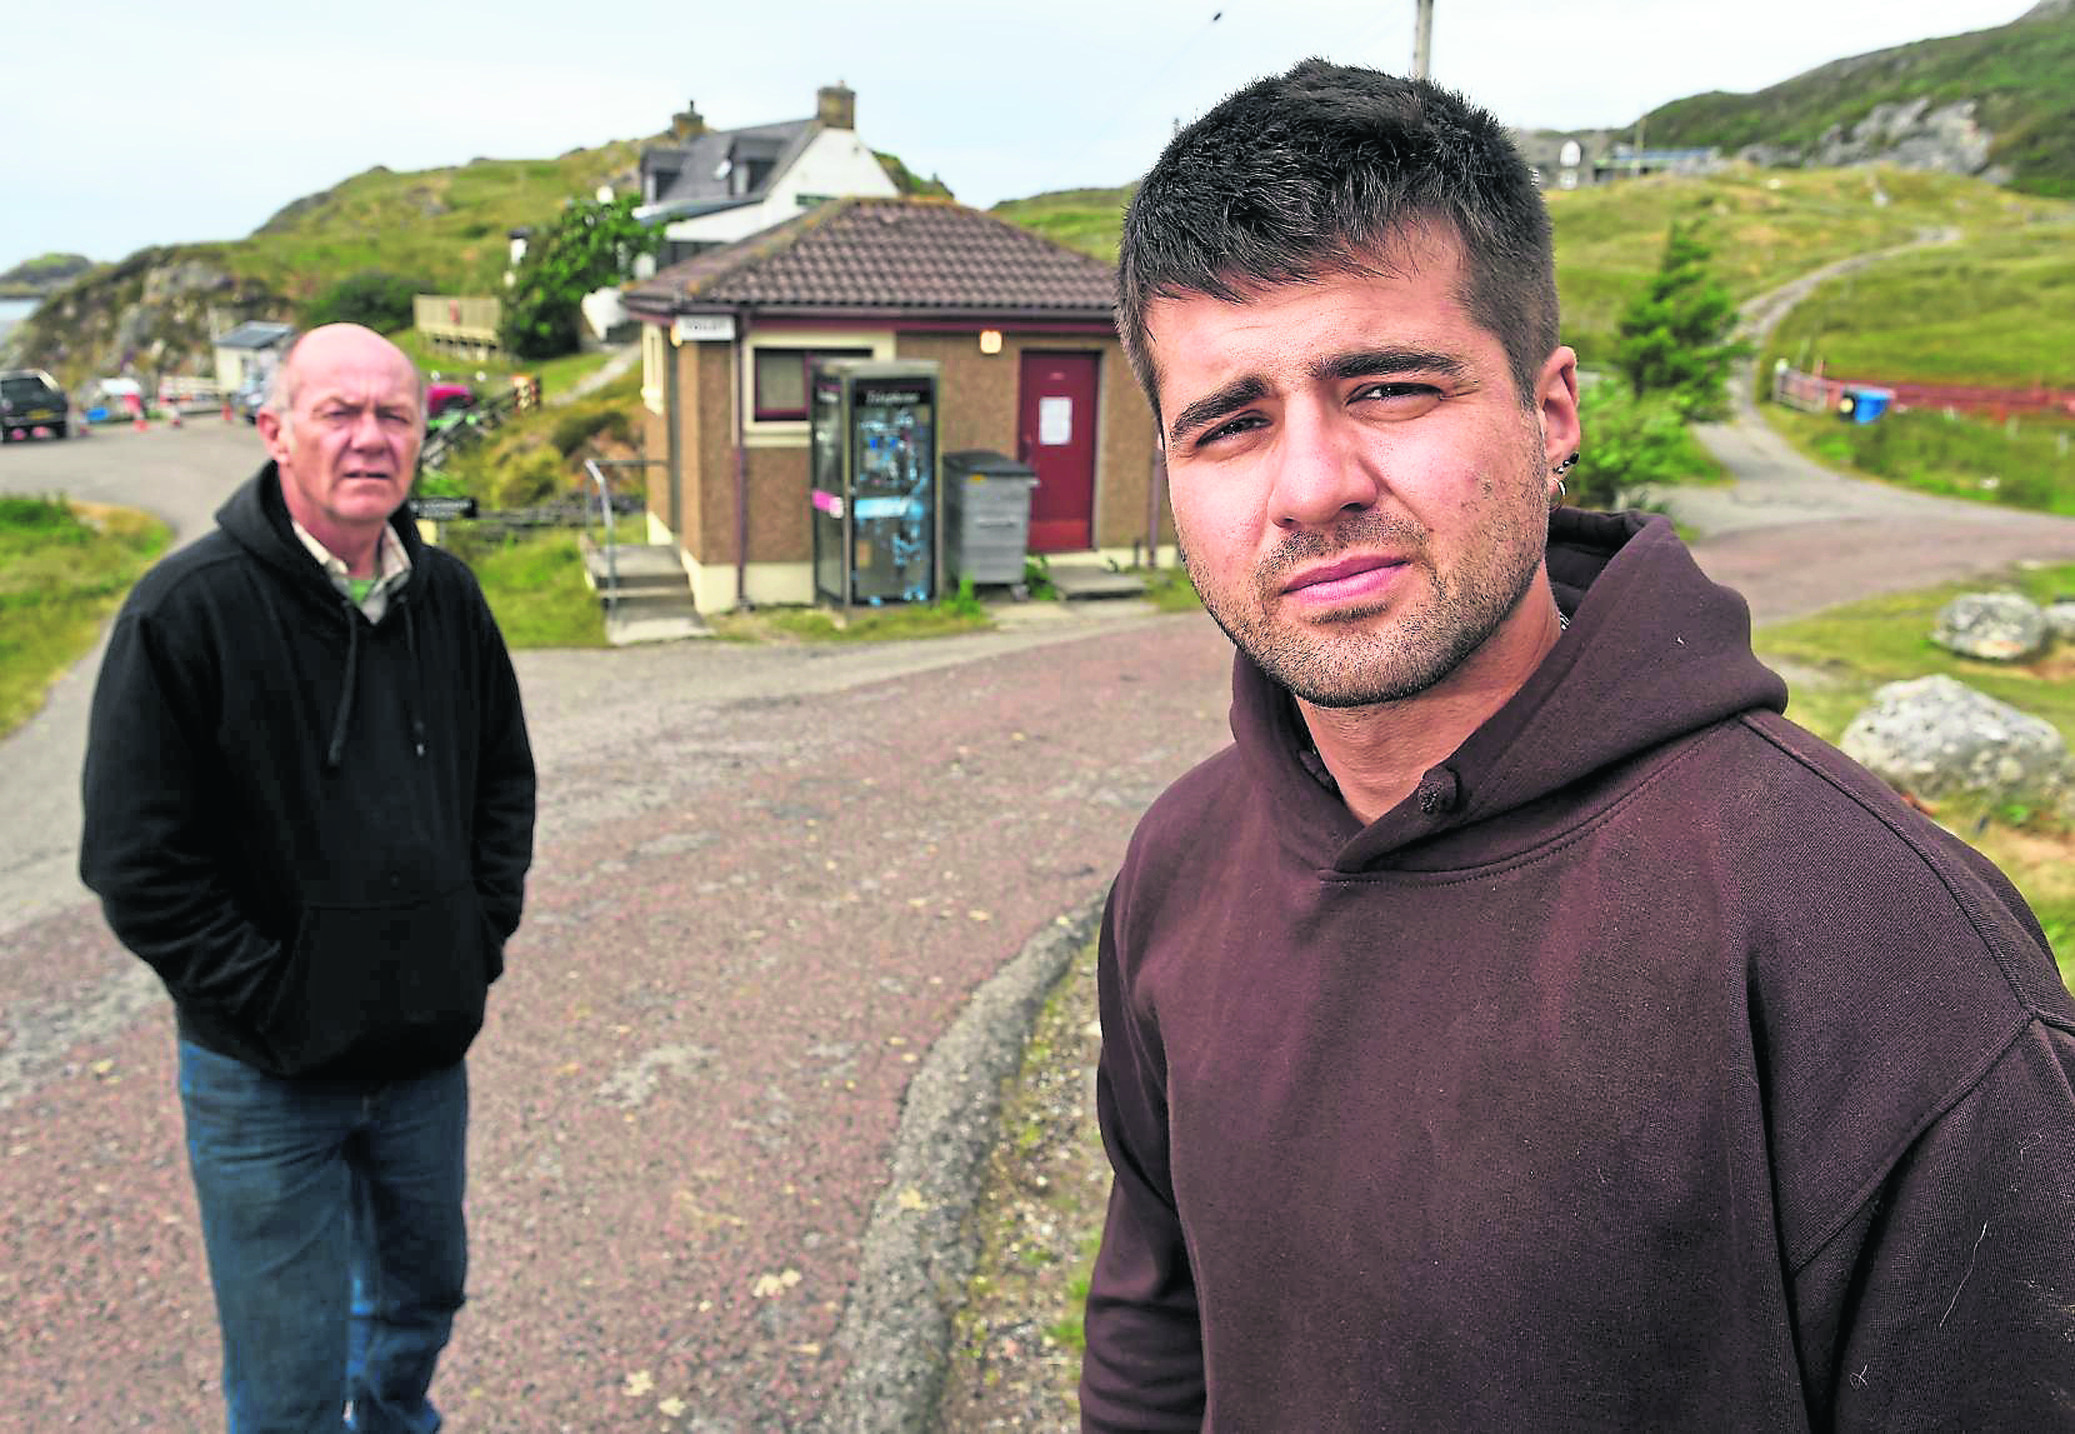 Julian and Adam Pearce of Tarbet, who fear the public toilets could close permanently. Photographs by Sandy McCook